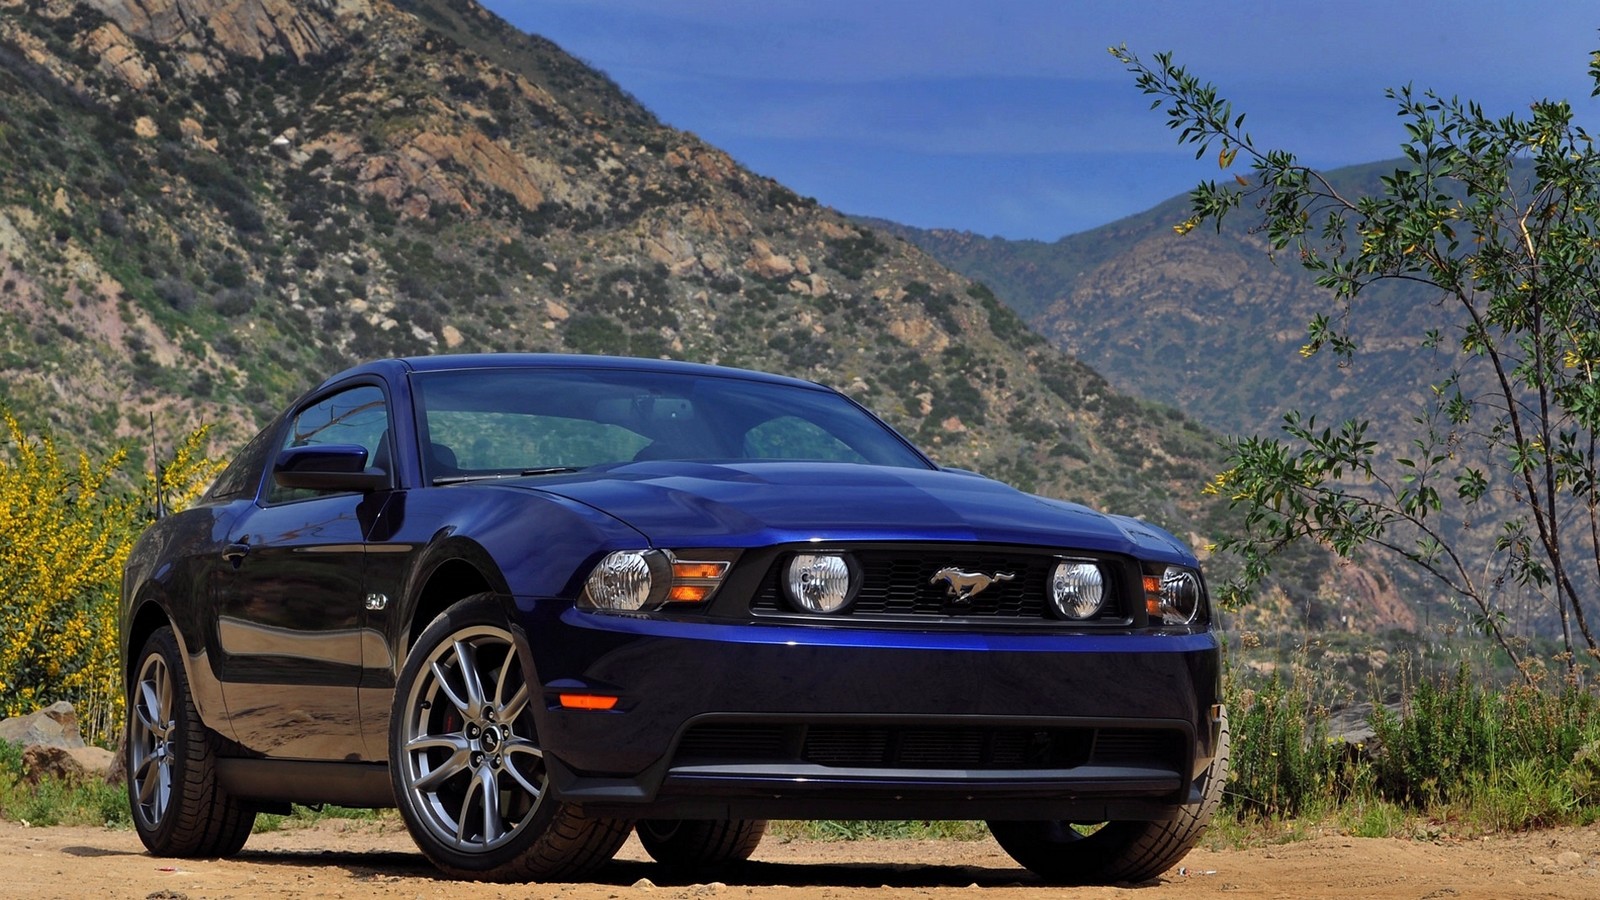 Ford Mustang V6 2011 Premium | DRIVE2